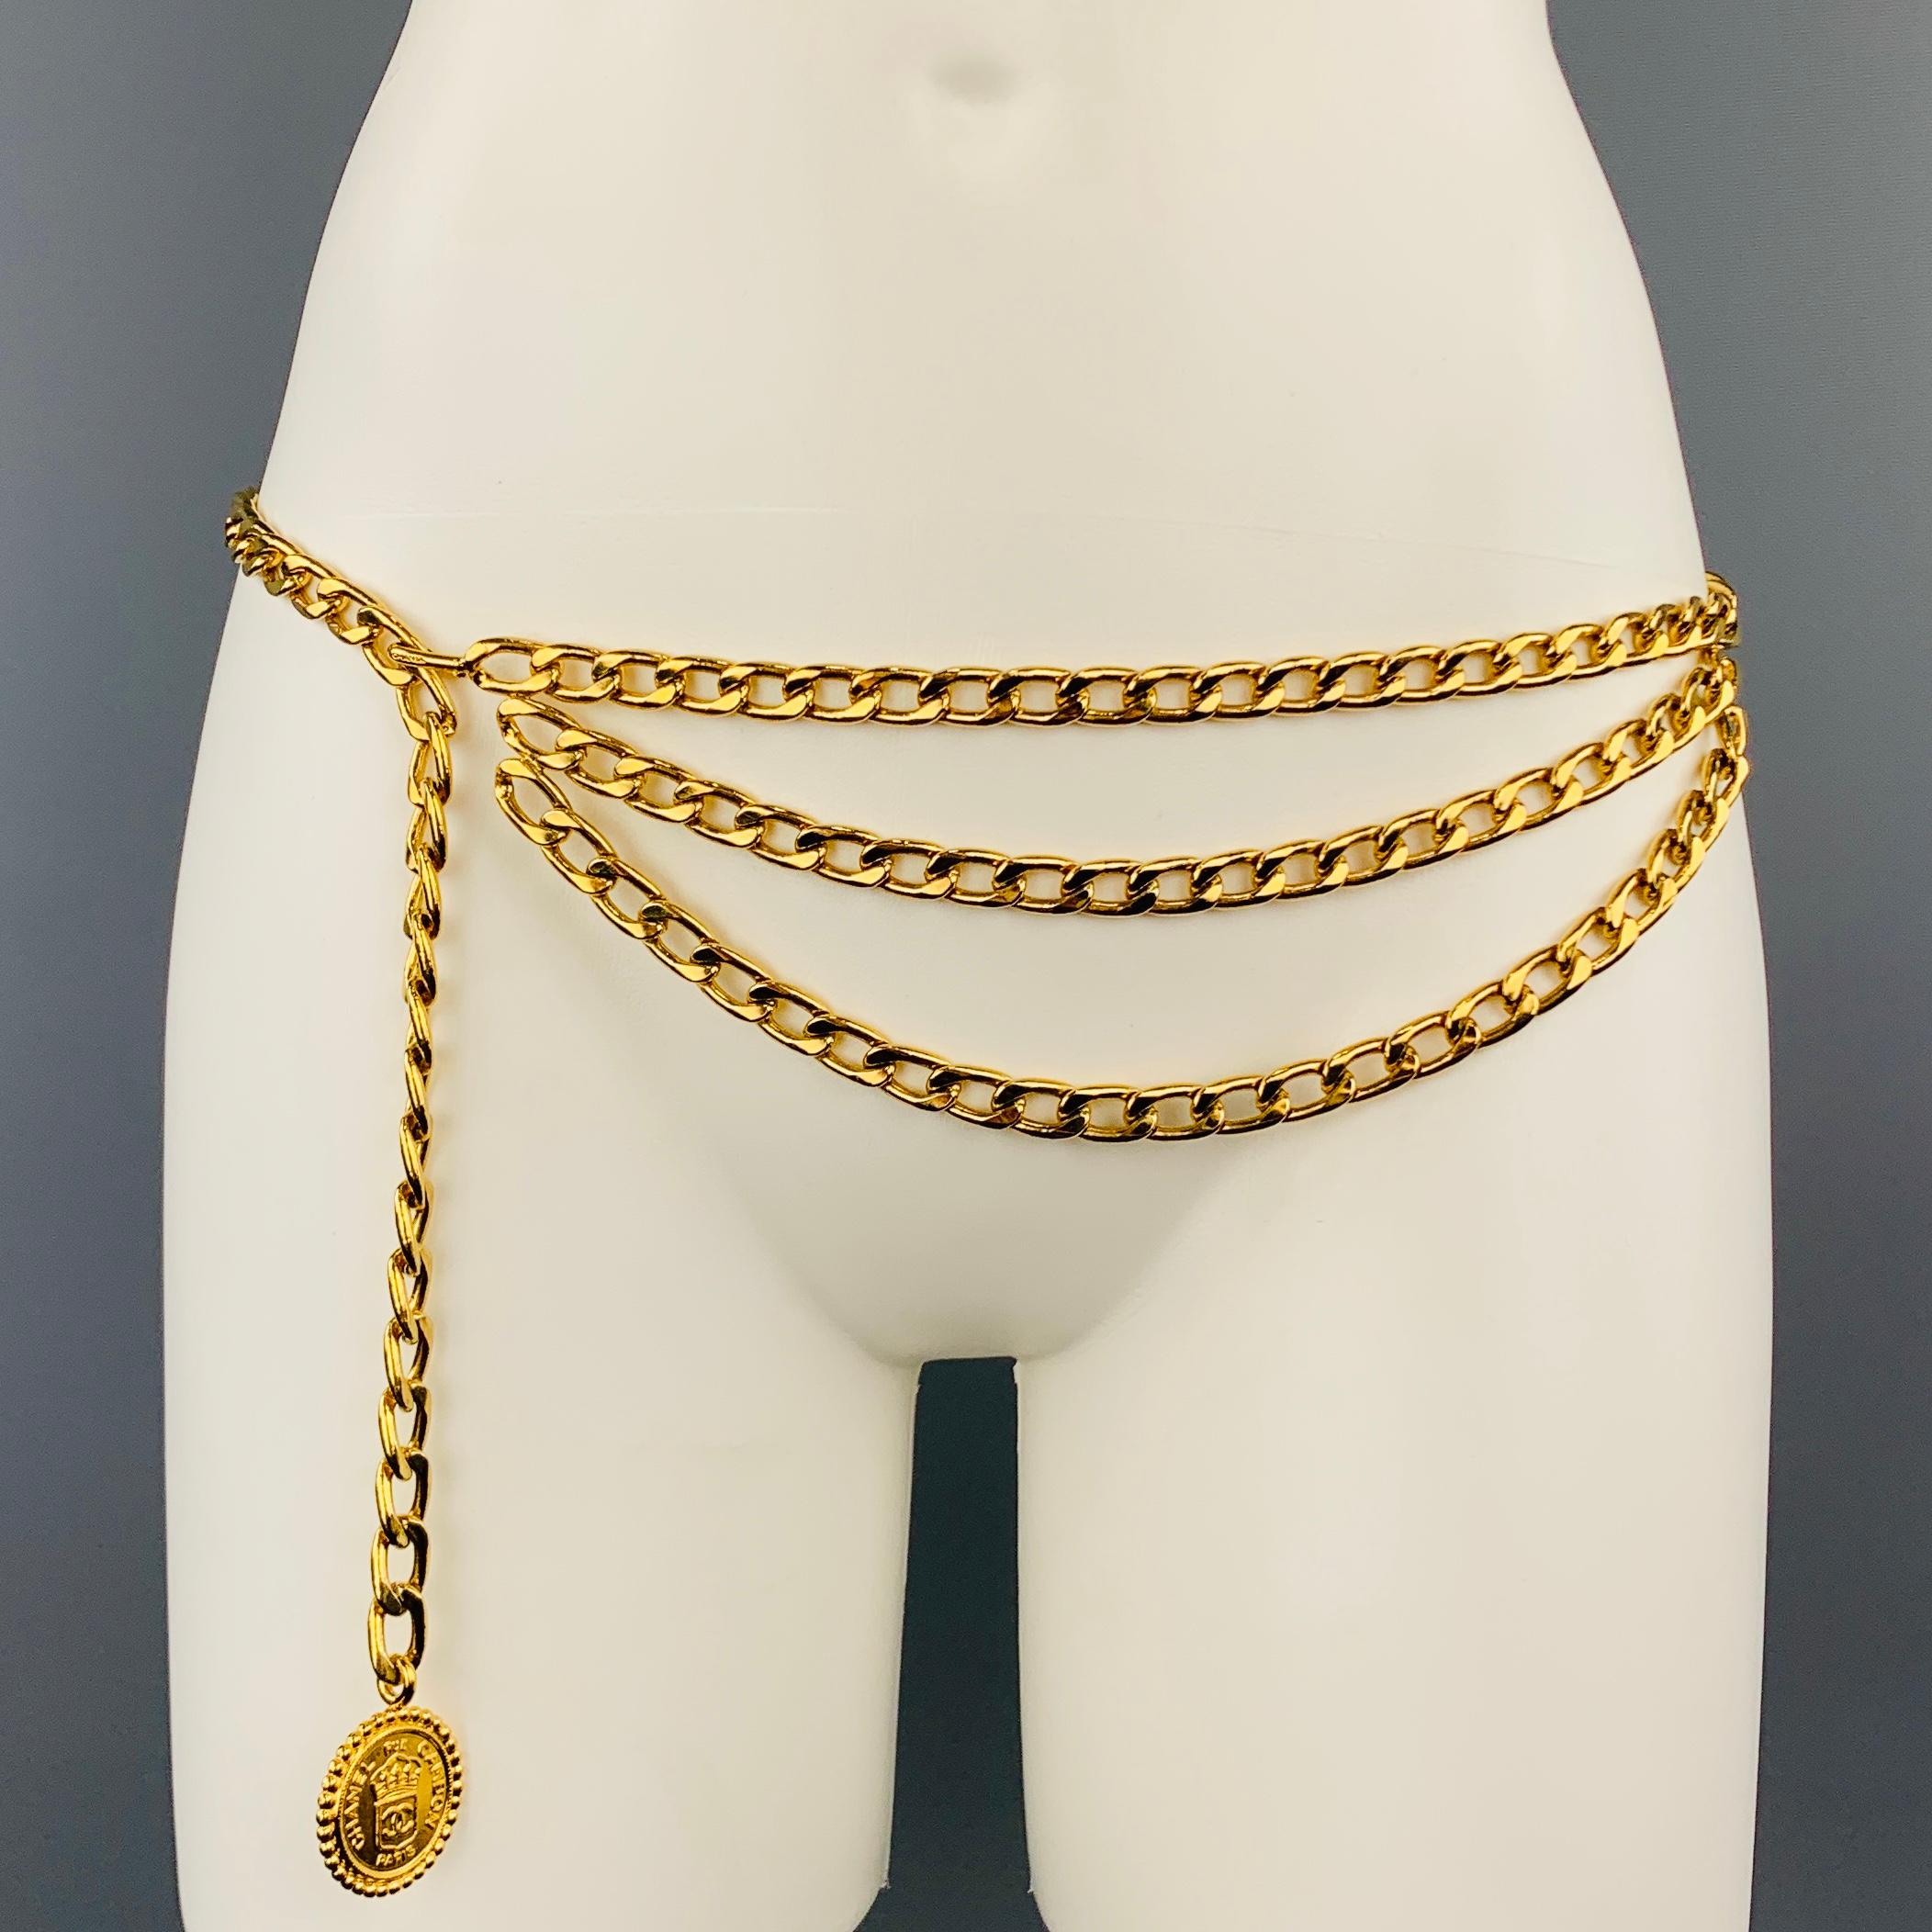 Vintage CHANEL belt circa 1970's comes in yellow gold tone metal and features a double drop chain detail, hook closure, and embossed 